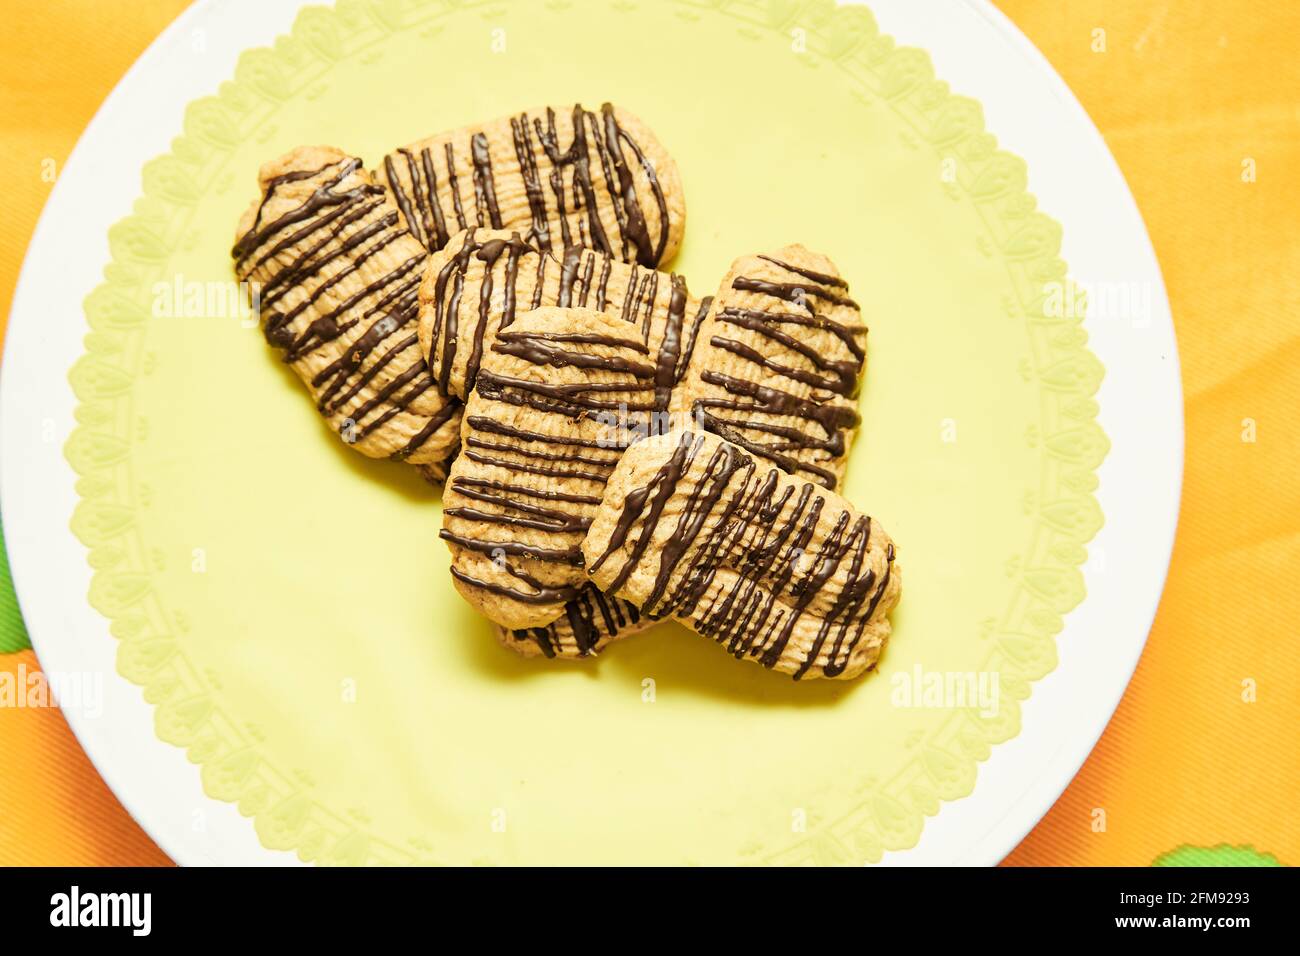 Butter cookies with chocolate on top on yellow background ready to eat. Concept of homemade food. Stock Photo